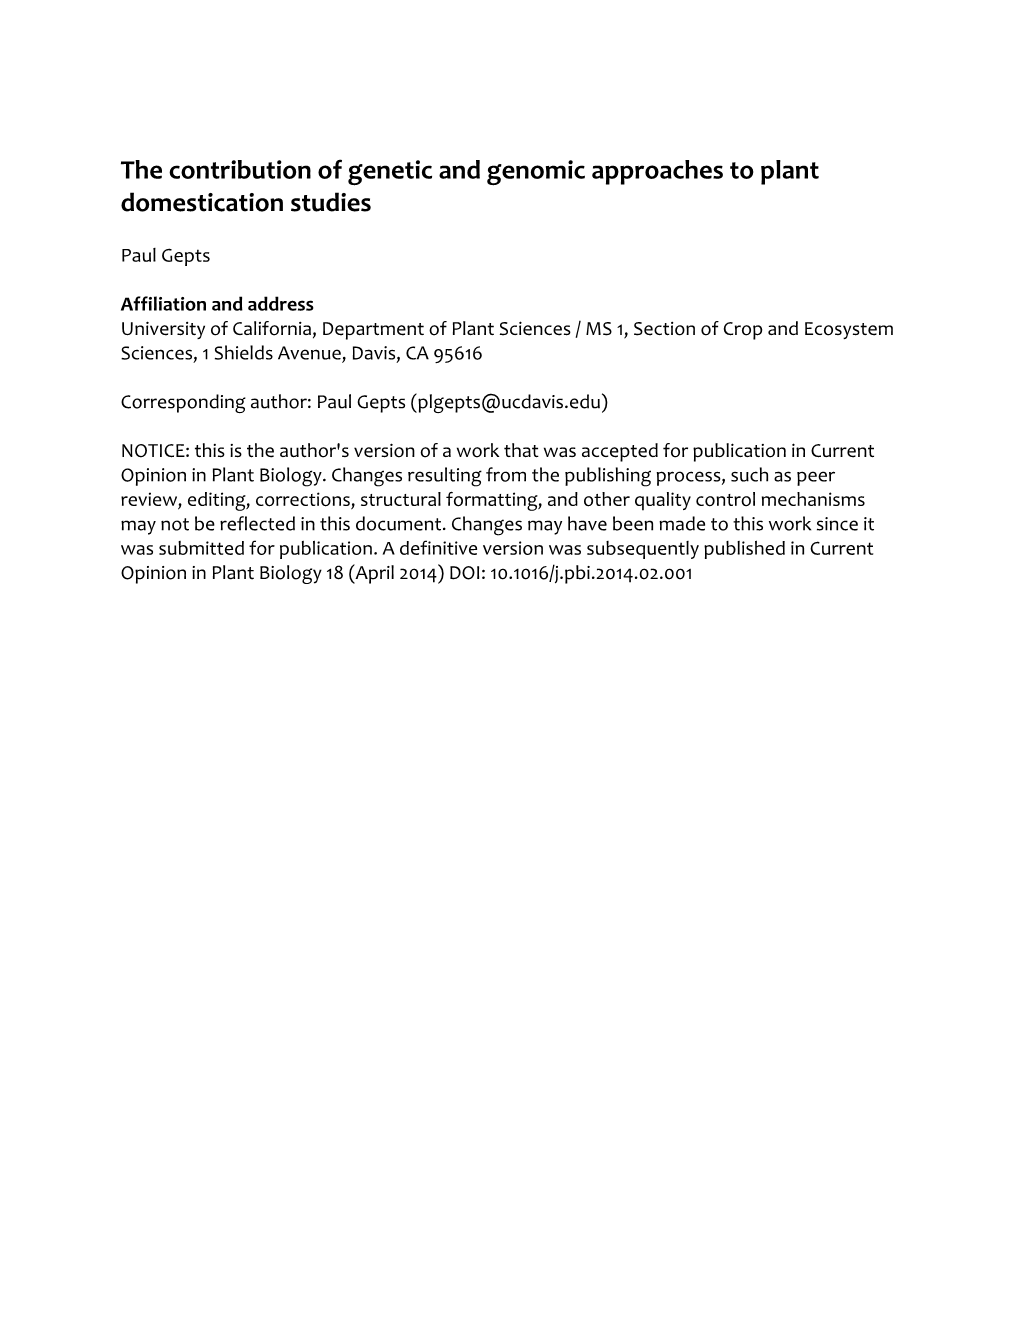 The Contribution of Genetic and Genomic Approaches to Plant Domestication Studies